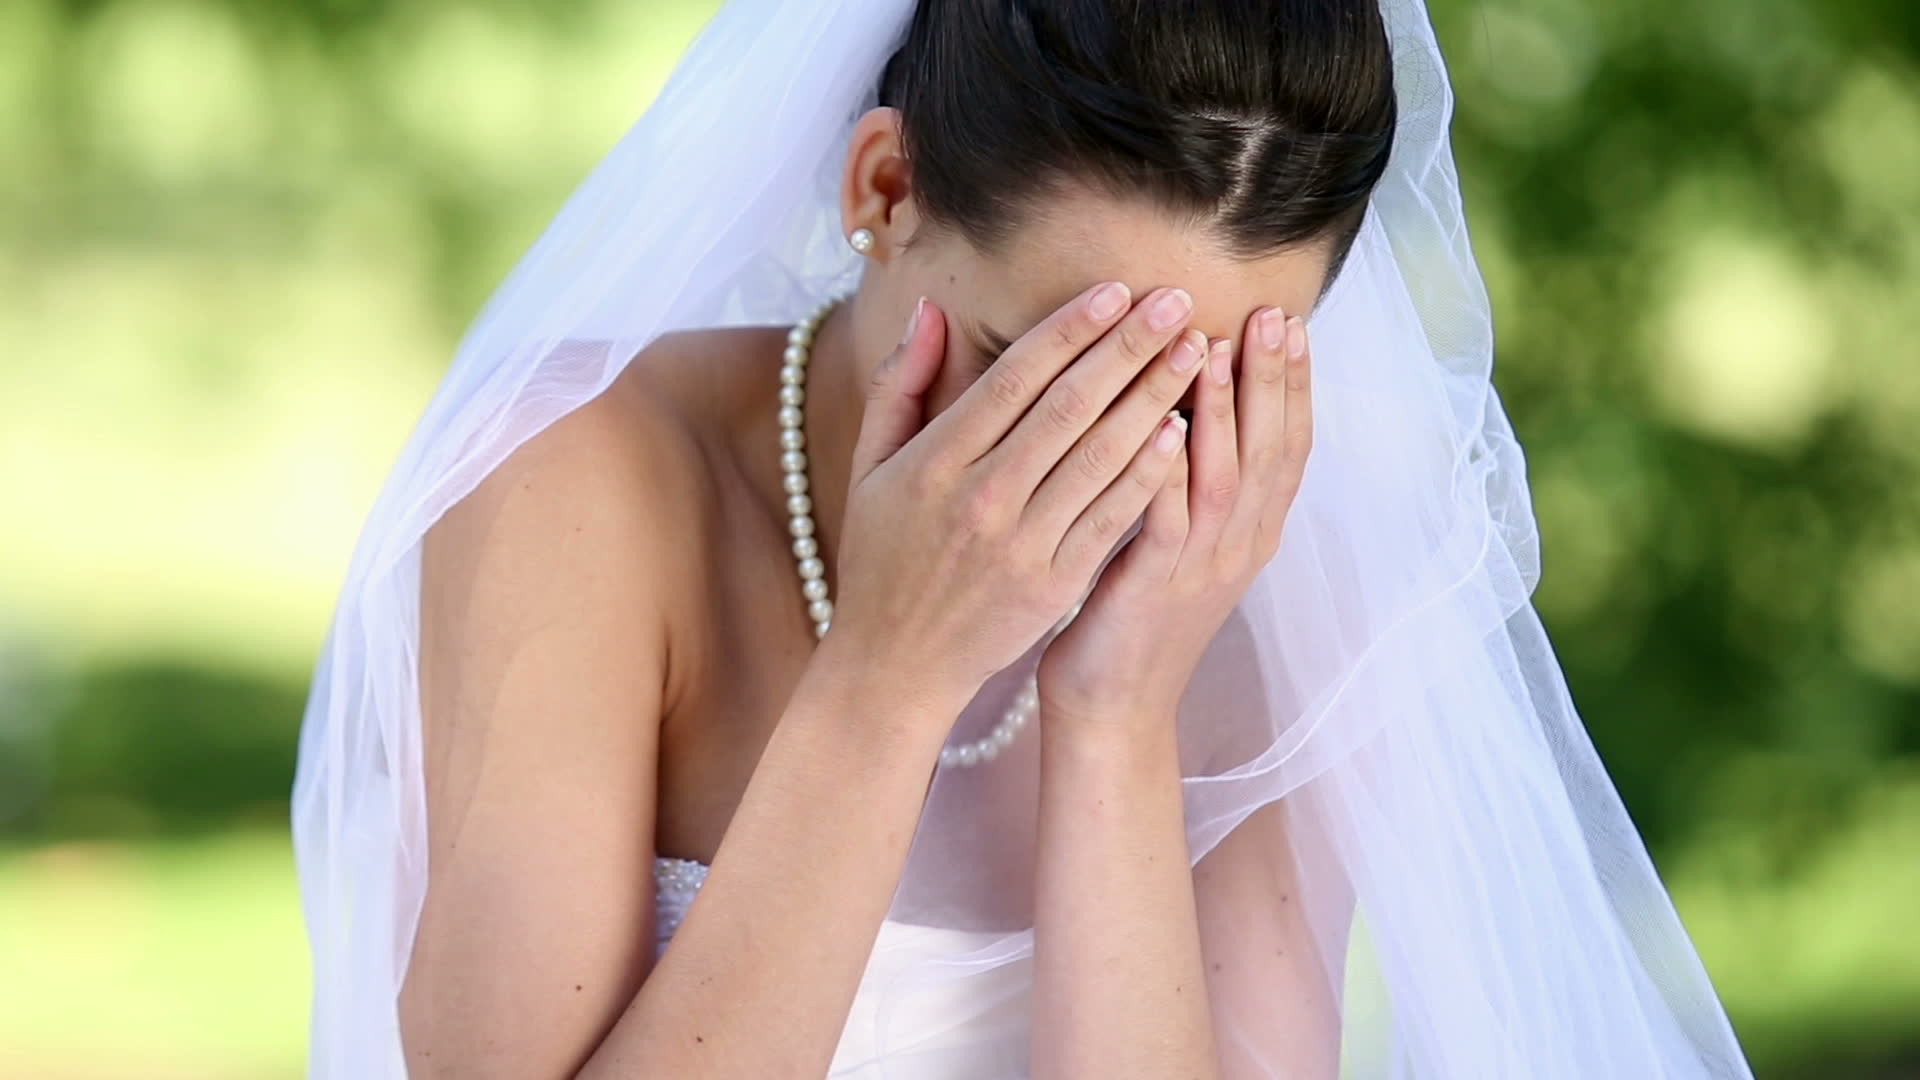 4 tips to deal with stress on your big day